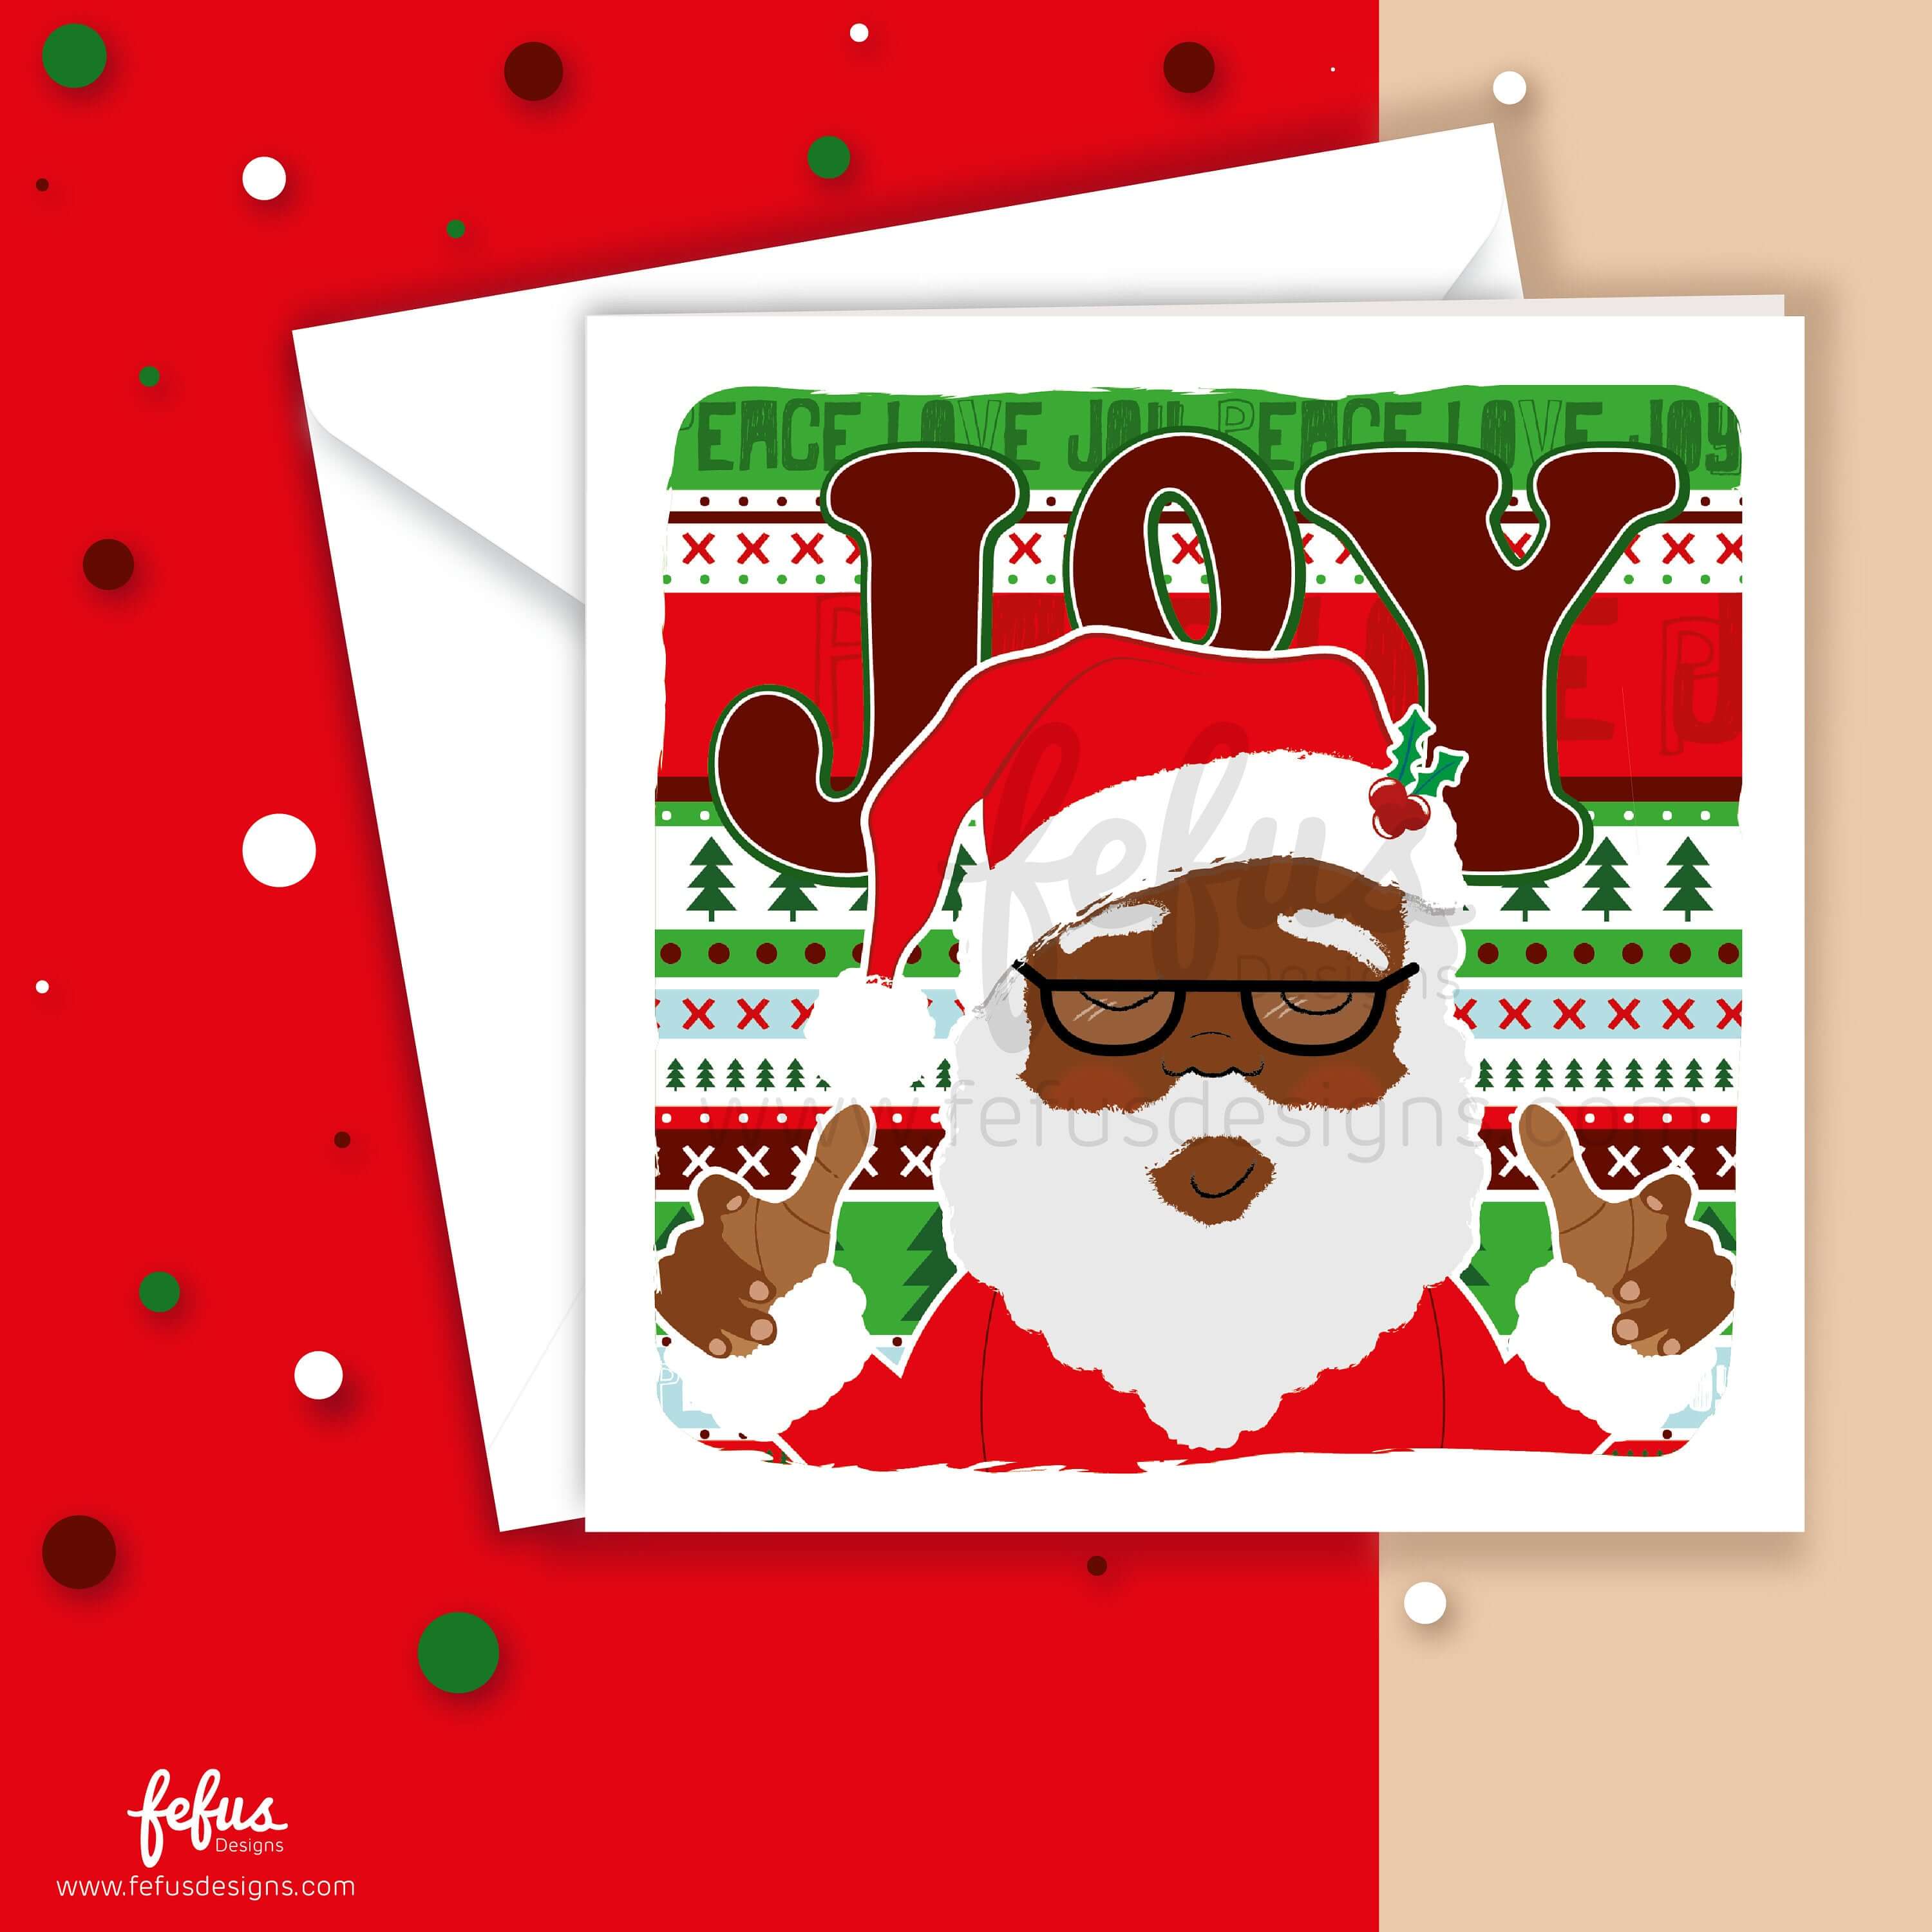 A Christmas card featuring a Black man dressed as Santa Claus by Fefus Designs